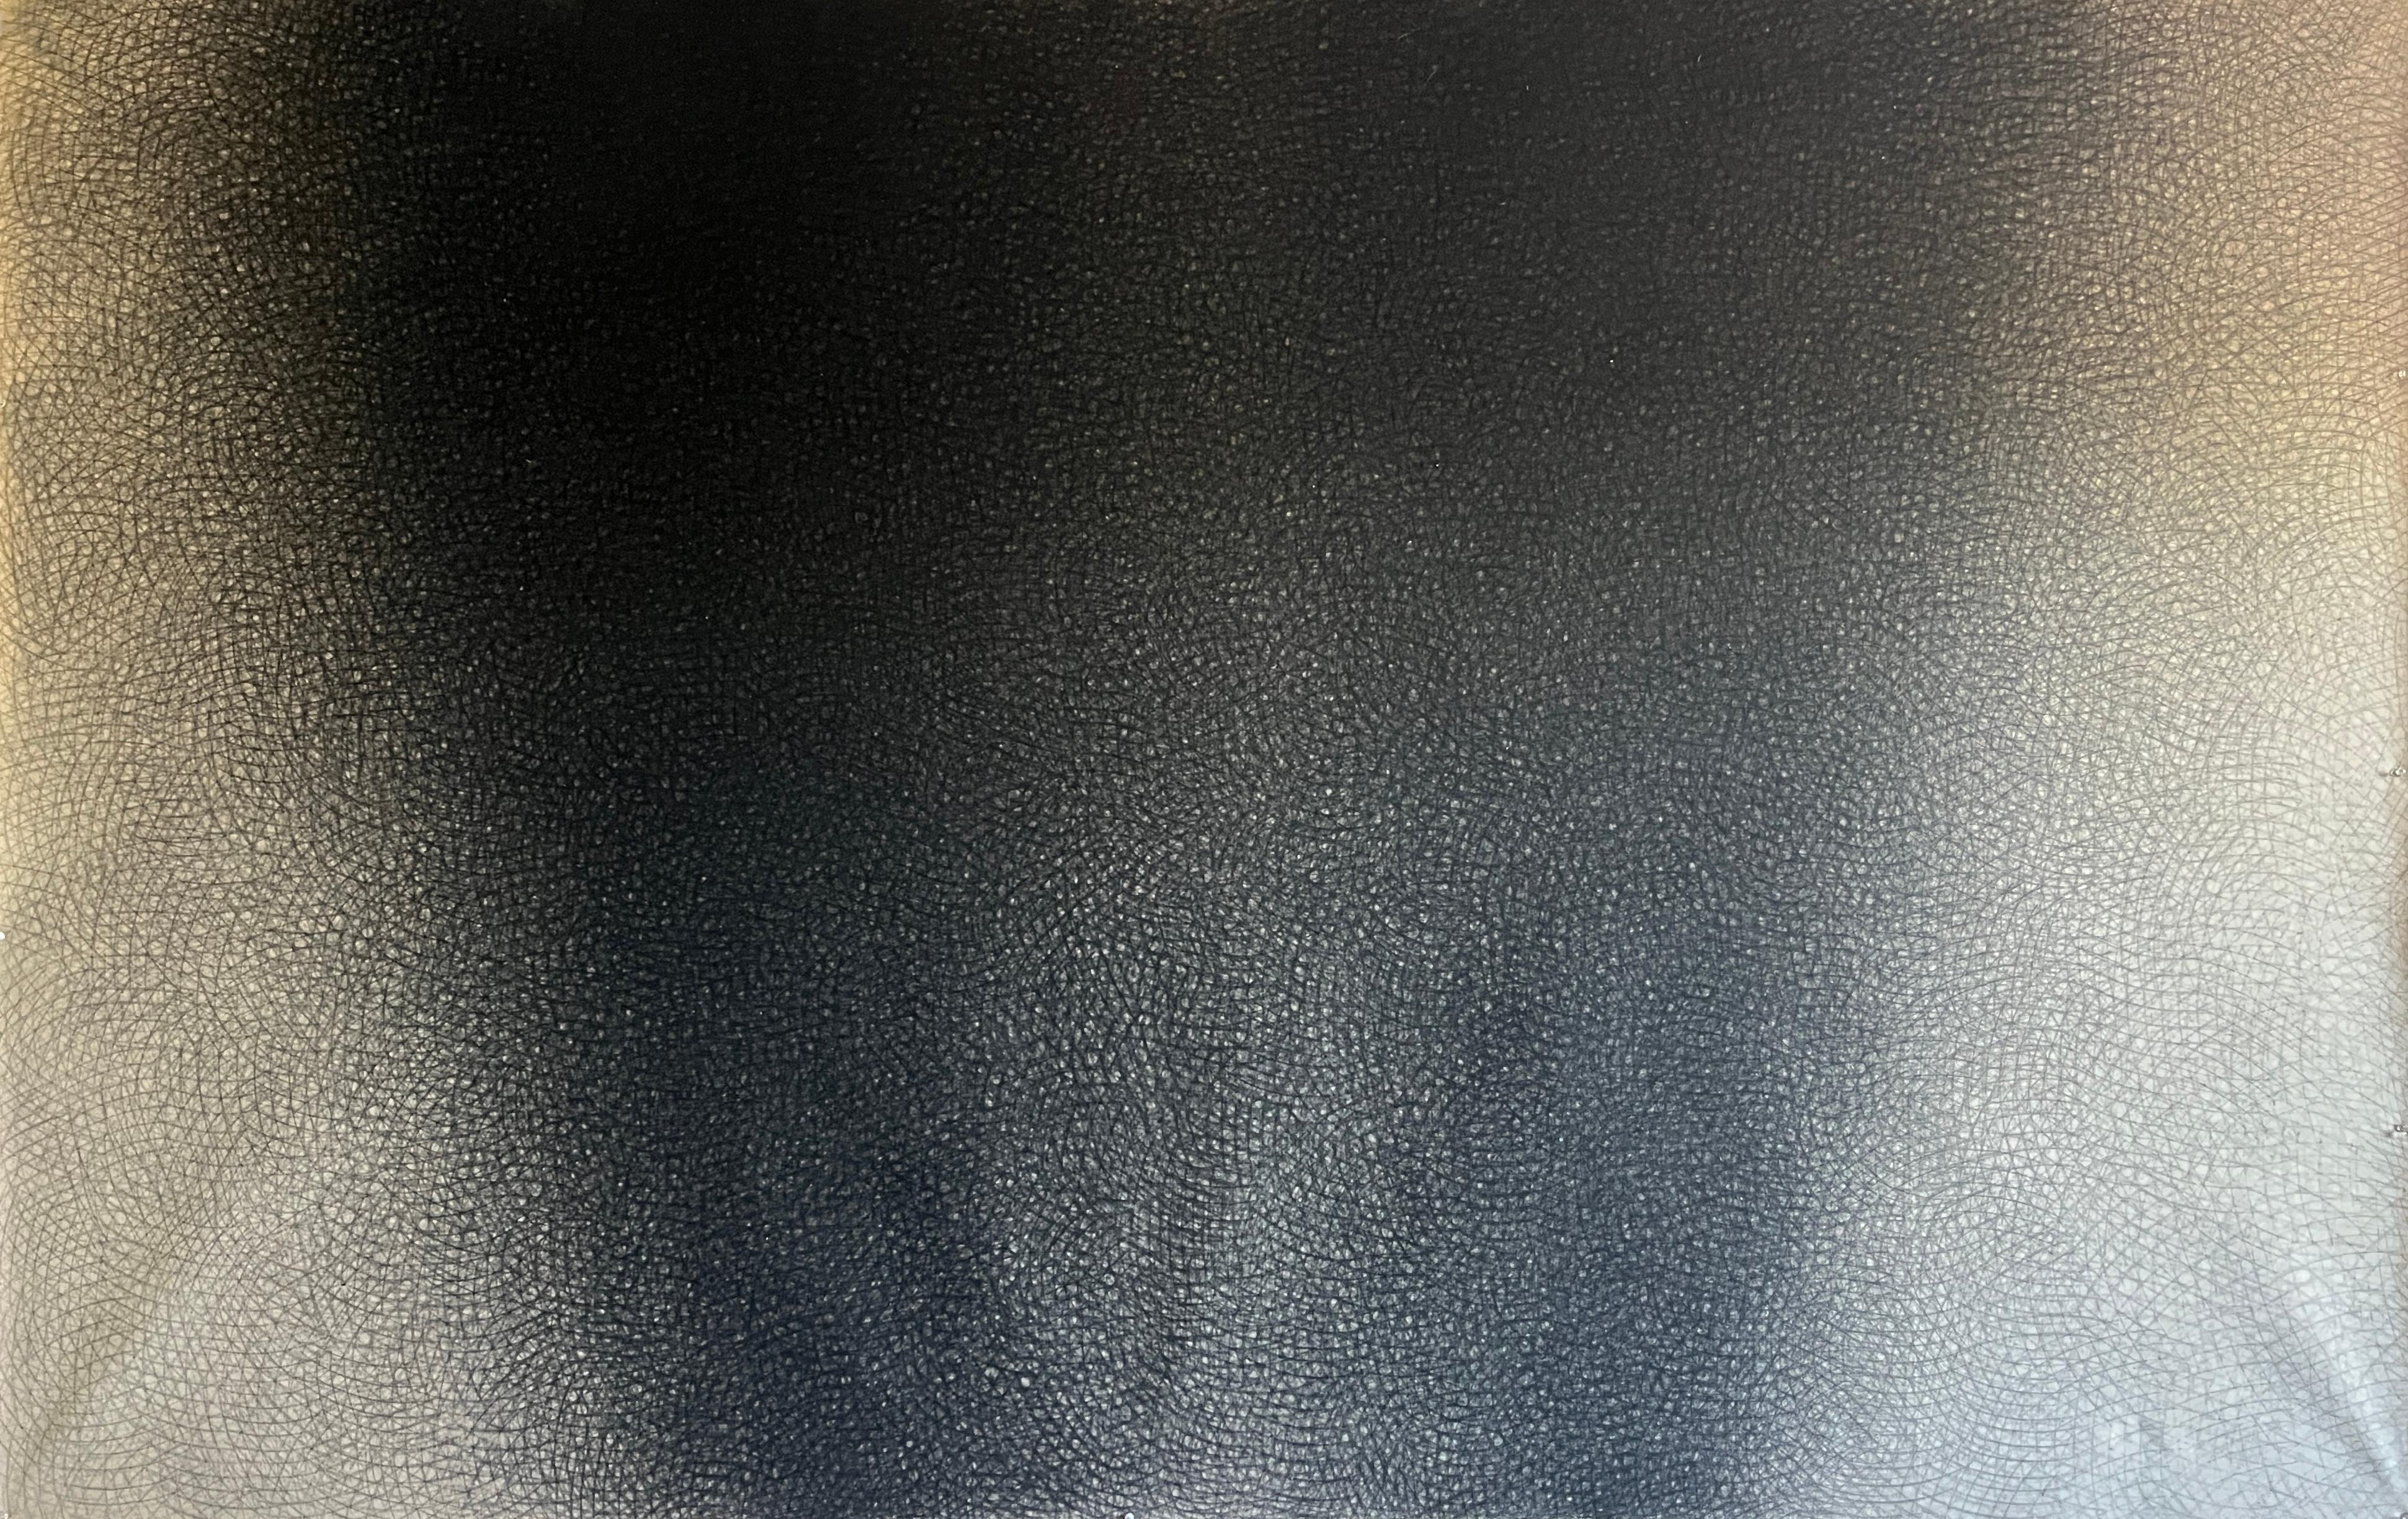 "Black Drawing (Introductions)" Charcoal Cross-Hatch Drawing on Canvas 1976 